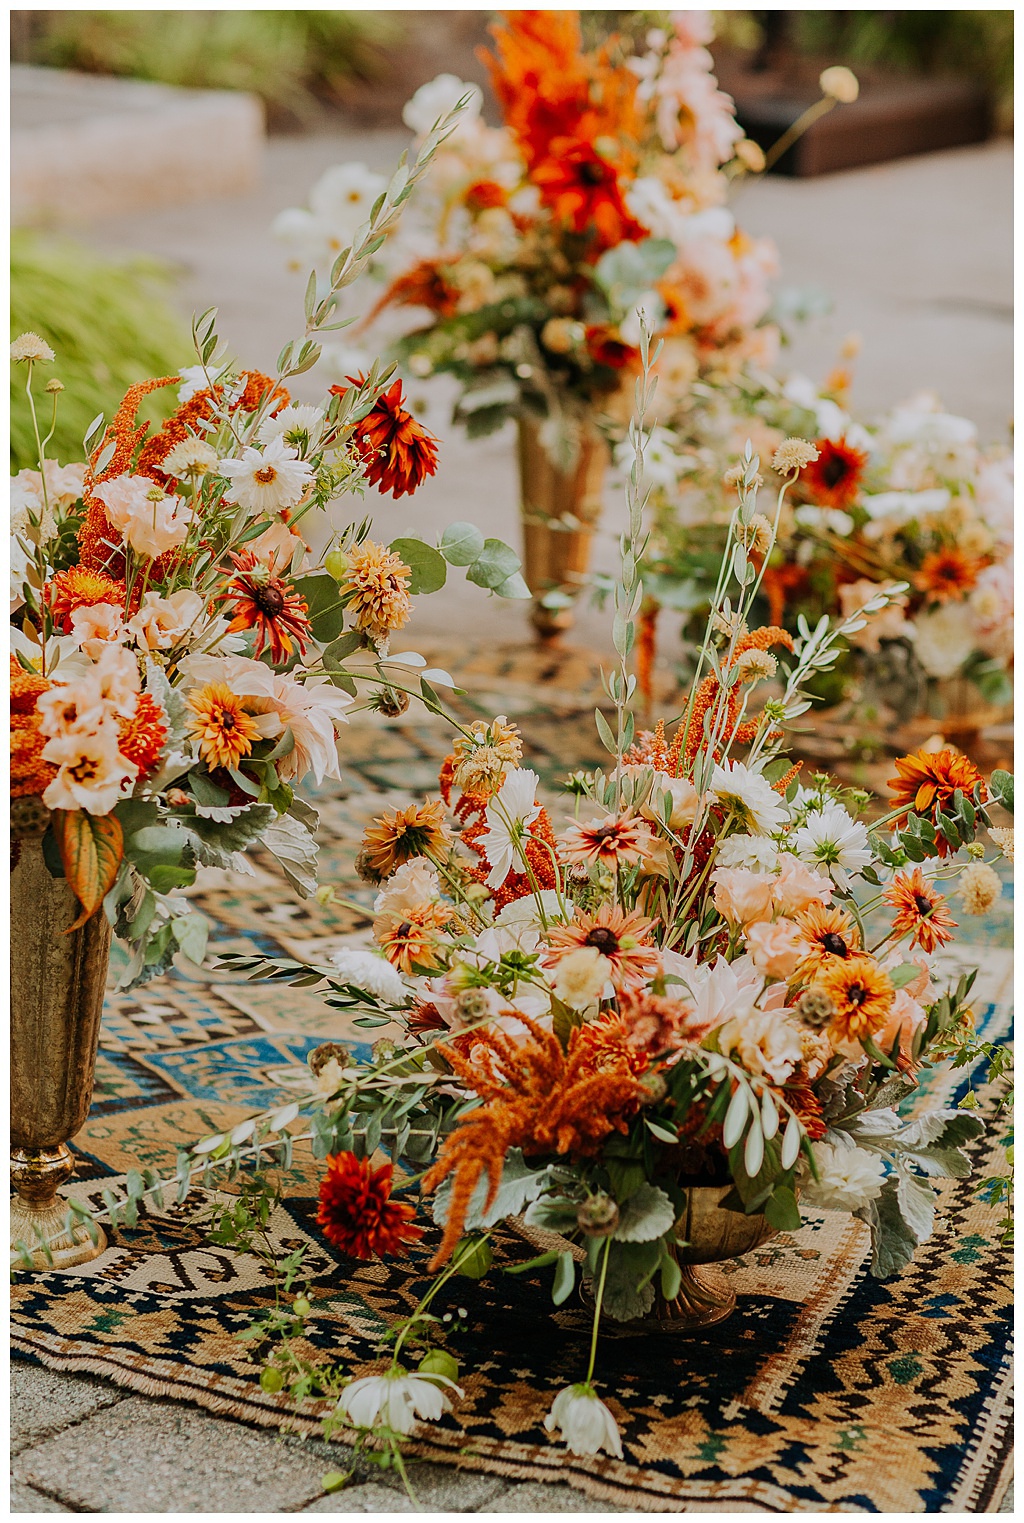 The ceremony setup with lush fall wedding florals